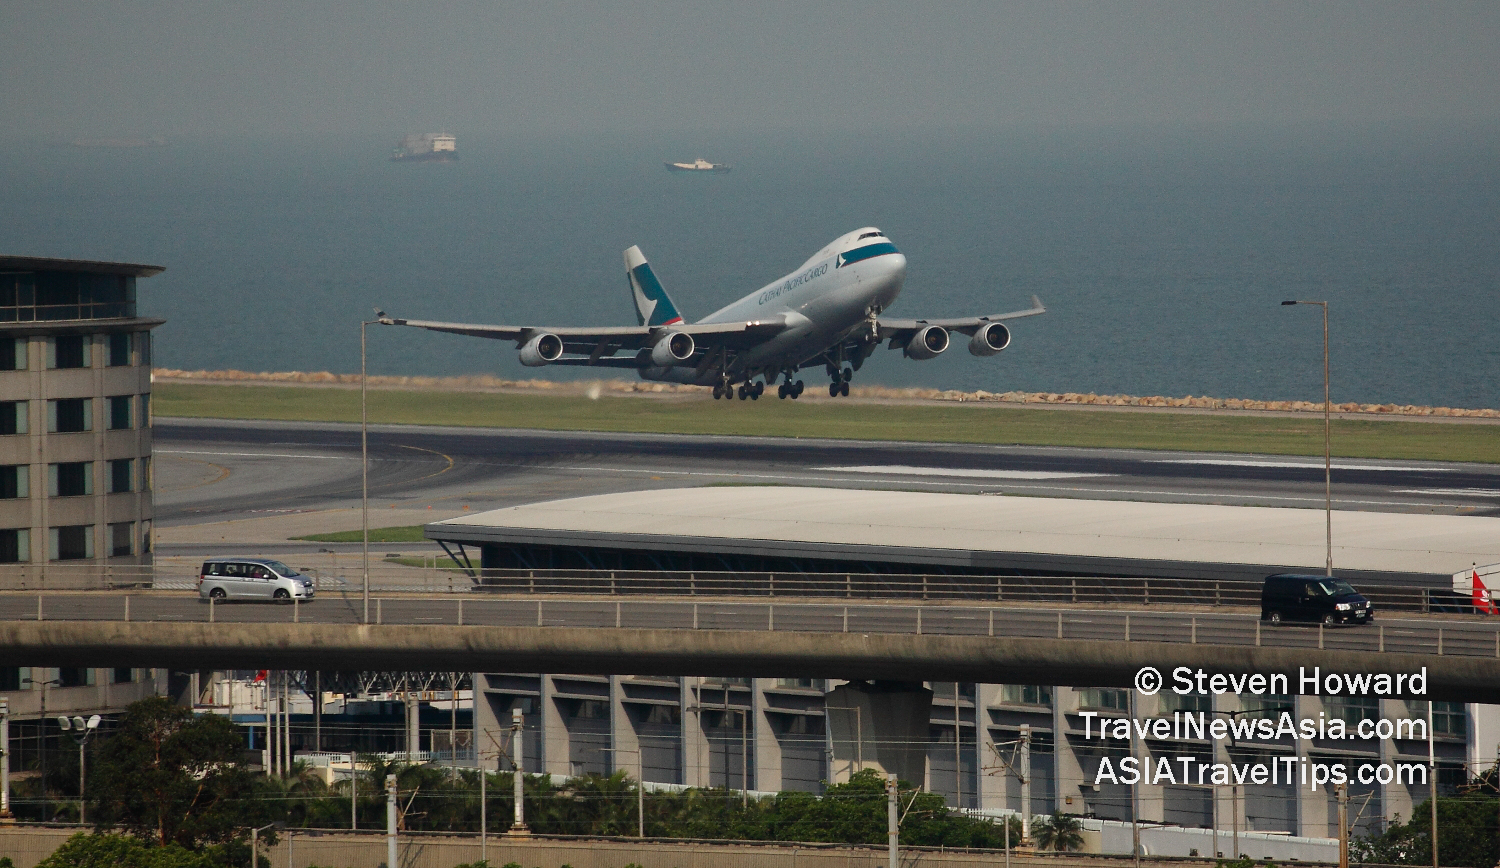 Cathay Pacific B747F taking off from Hong Kong International Airport (HKIA). Picture by Steven Howard of TravelNewsAsia.com Click to enlarge.